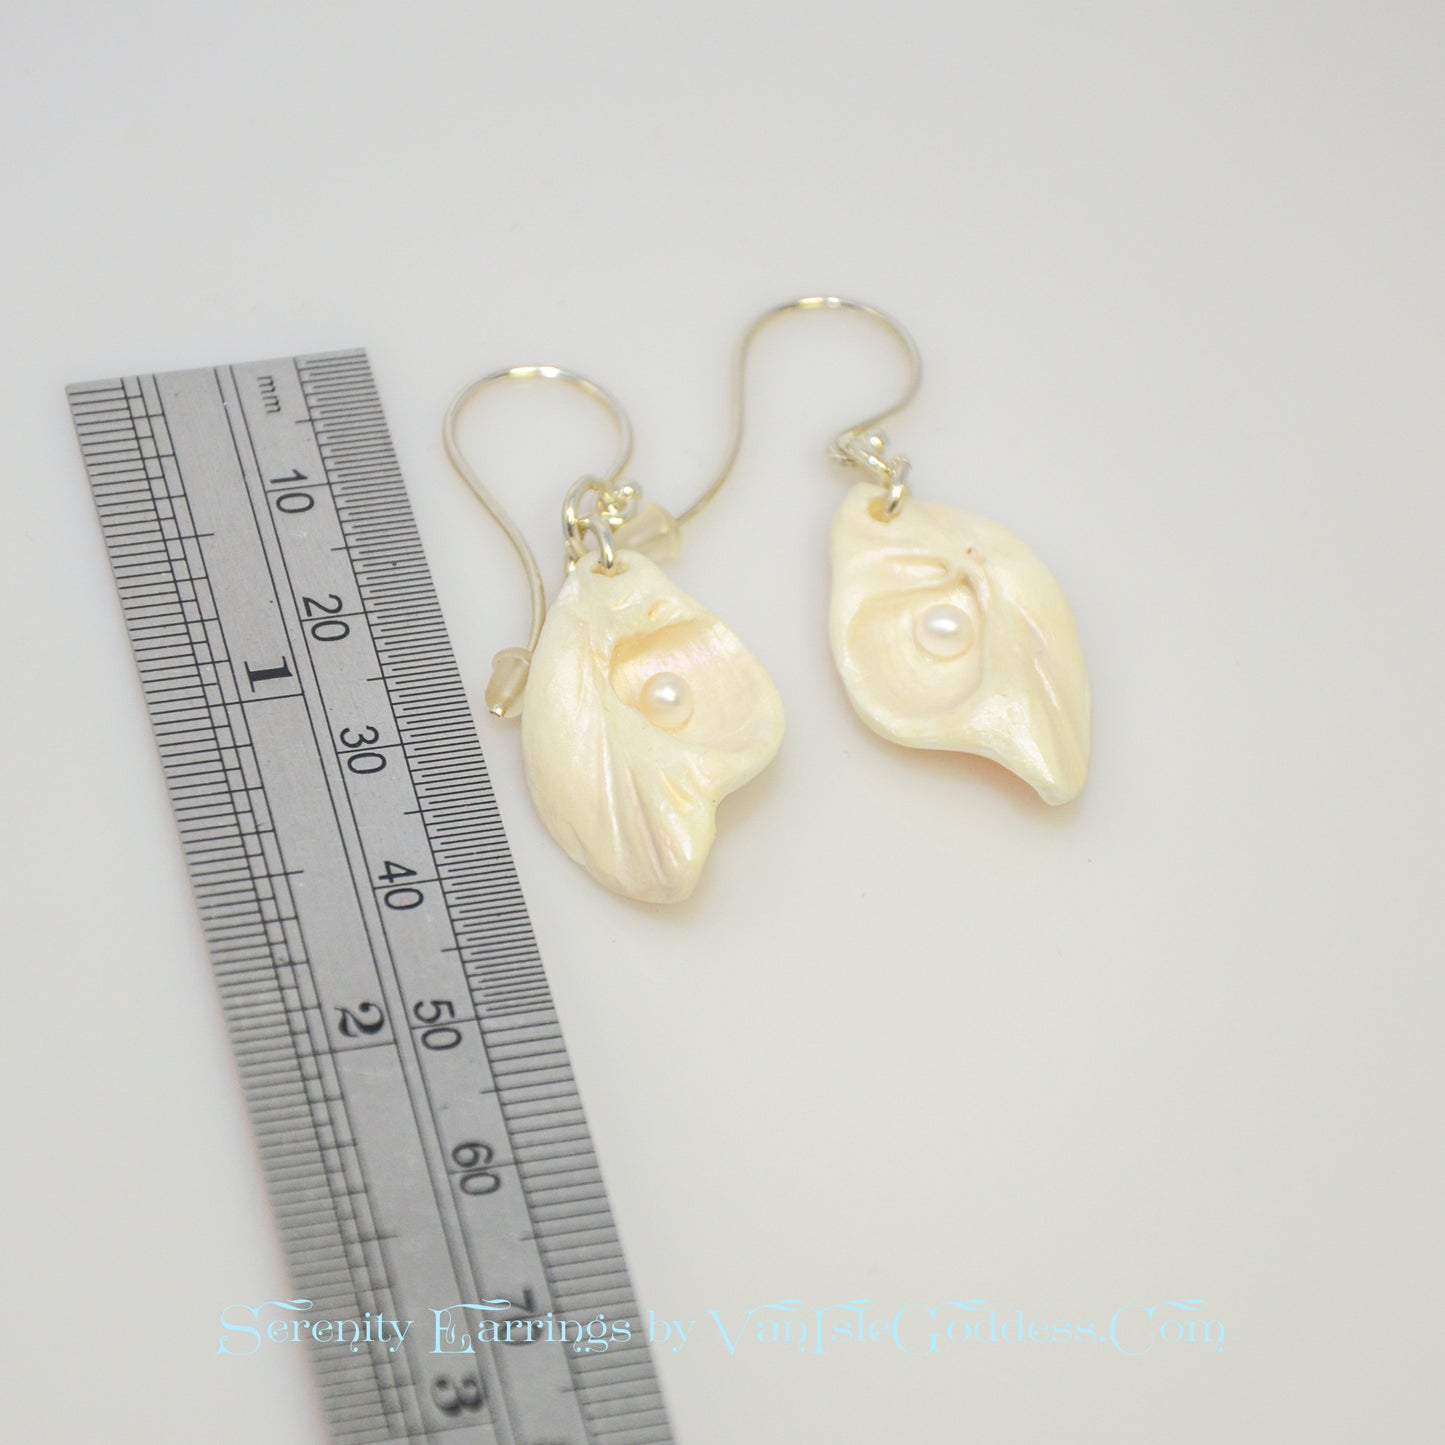 Serenity natural seashell earrings with real baby freshwater pearls. The earrings are next to a ruler so the viewer can see the length of the earrings.